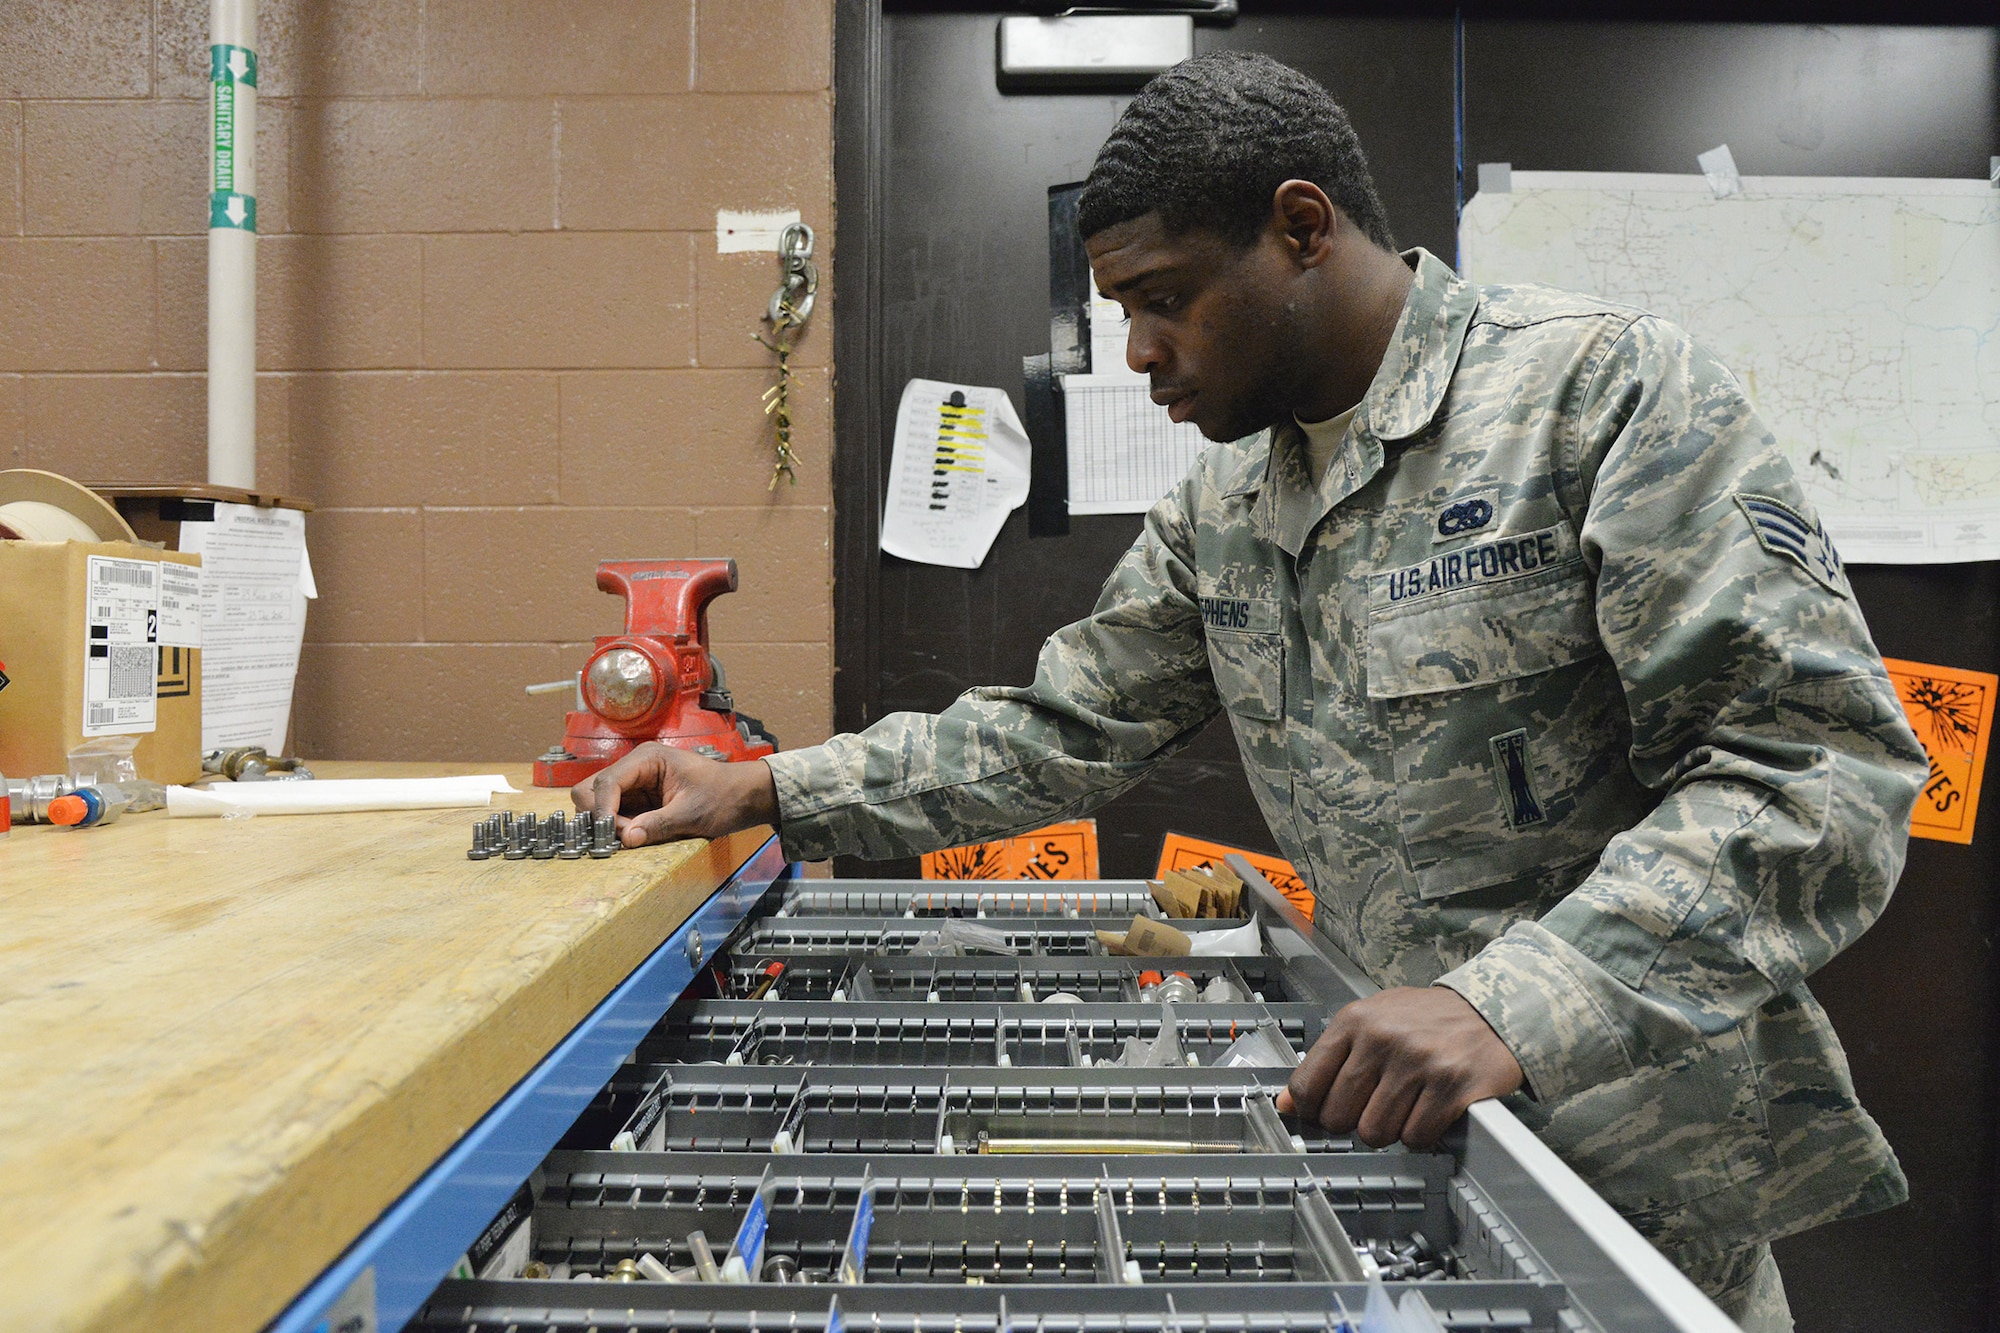 Senior Airman Shaquille Stephens, 341st Missile Maintenance Squadron maintenance technician, inspects a bench stock drawer Jan. 17, 2017, at Malmstrom Air Force Base, Mont. The drawer holds tools and equipment needed on a regular basis in the missile field. (U.S. Air Force photo/Airman 1st Class Daniel Brosam)